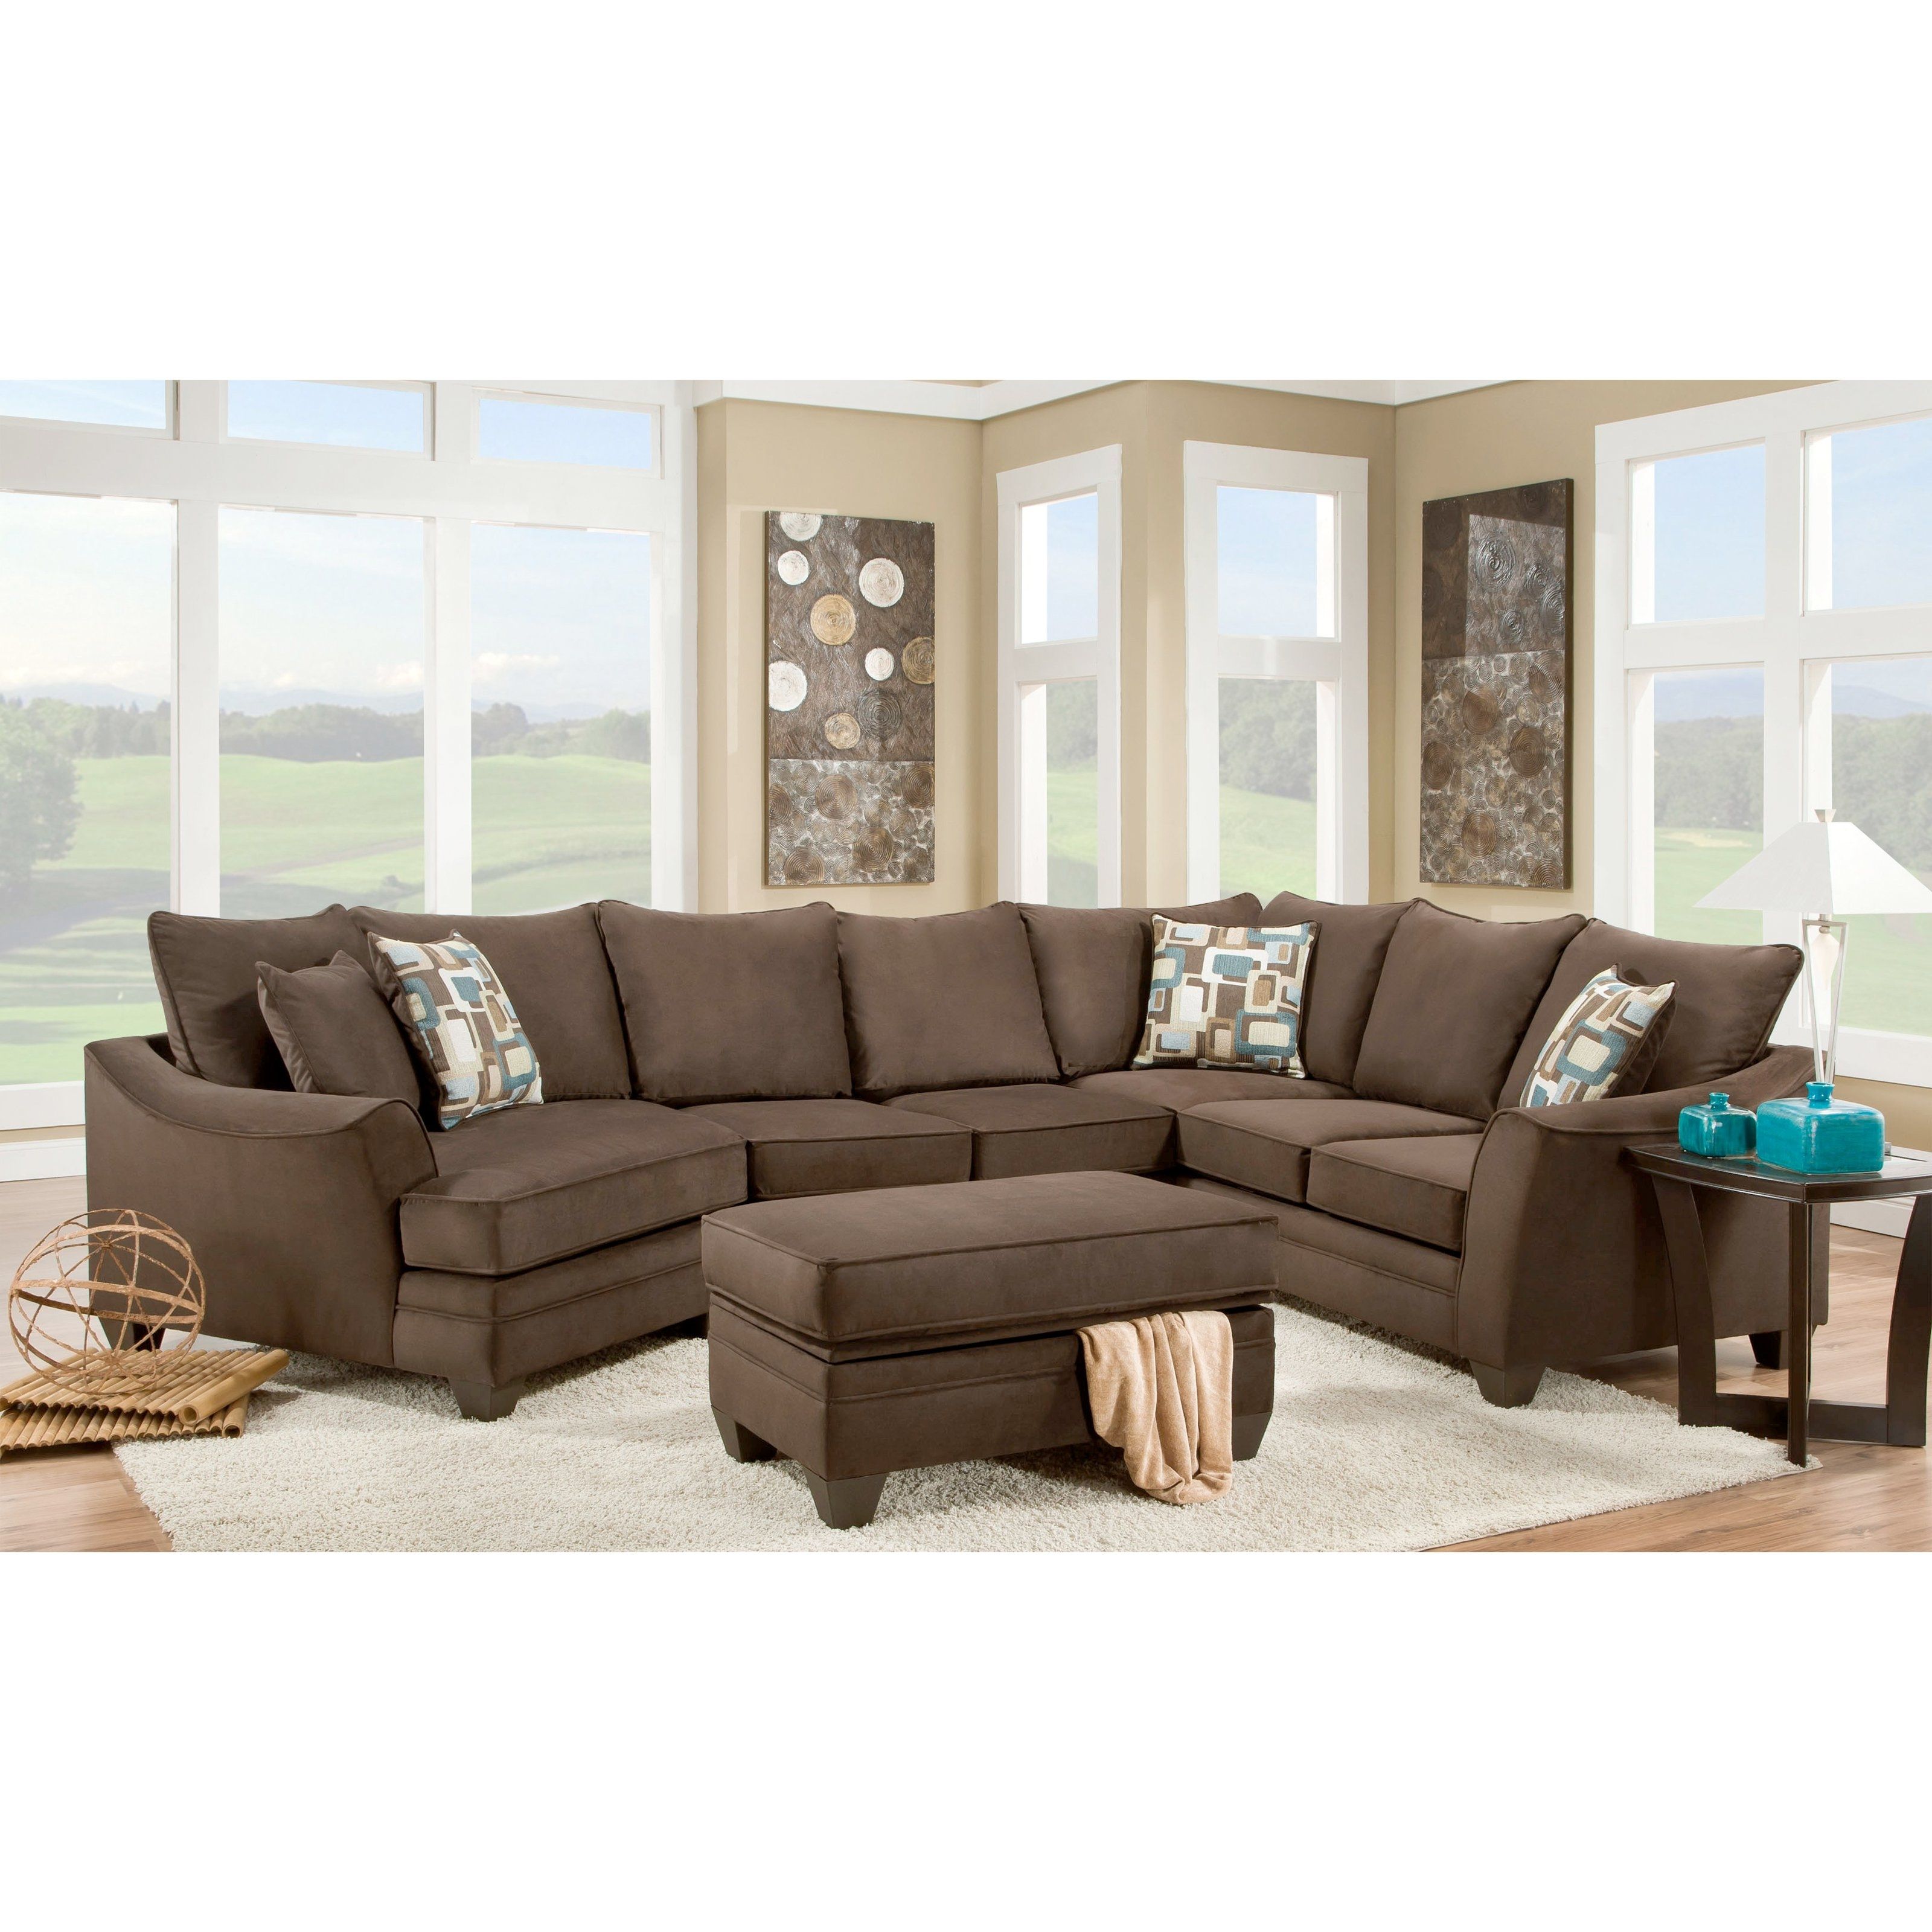 Featured Photo of 15 The Best Sectional Sofas in Greensboro Nc